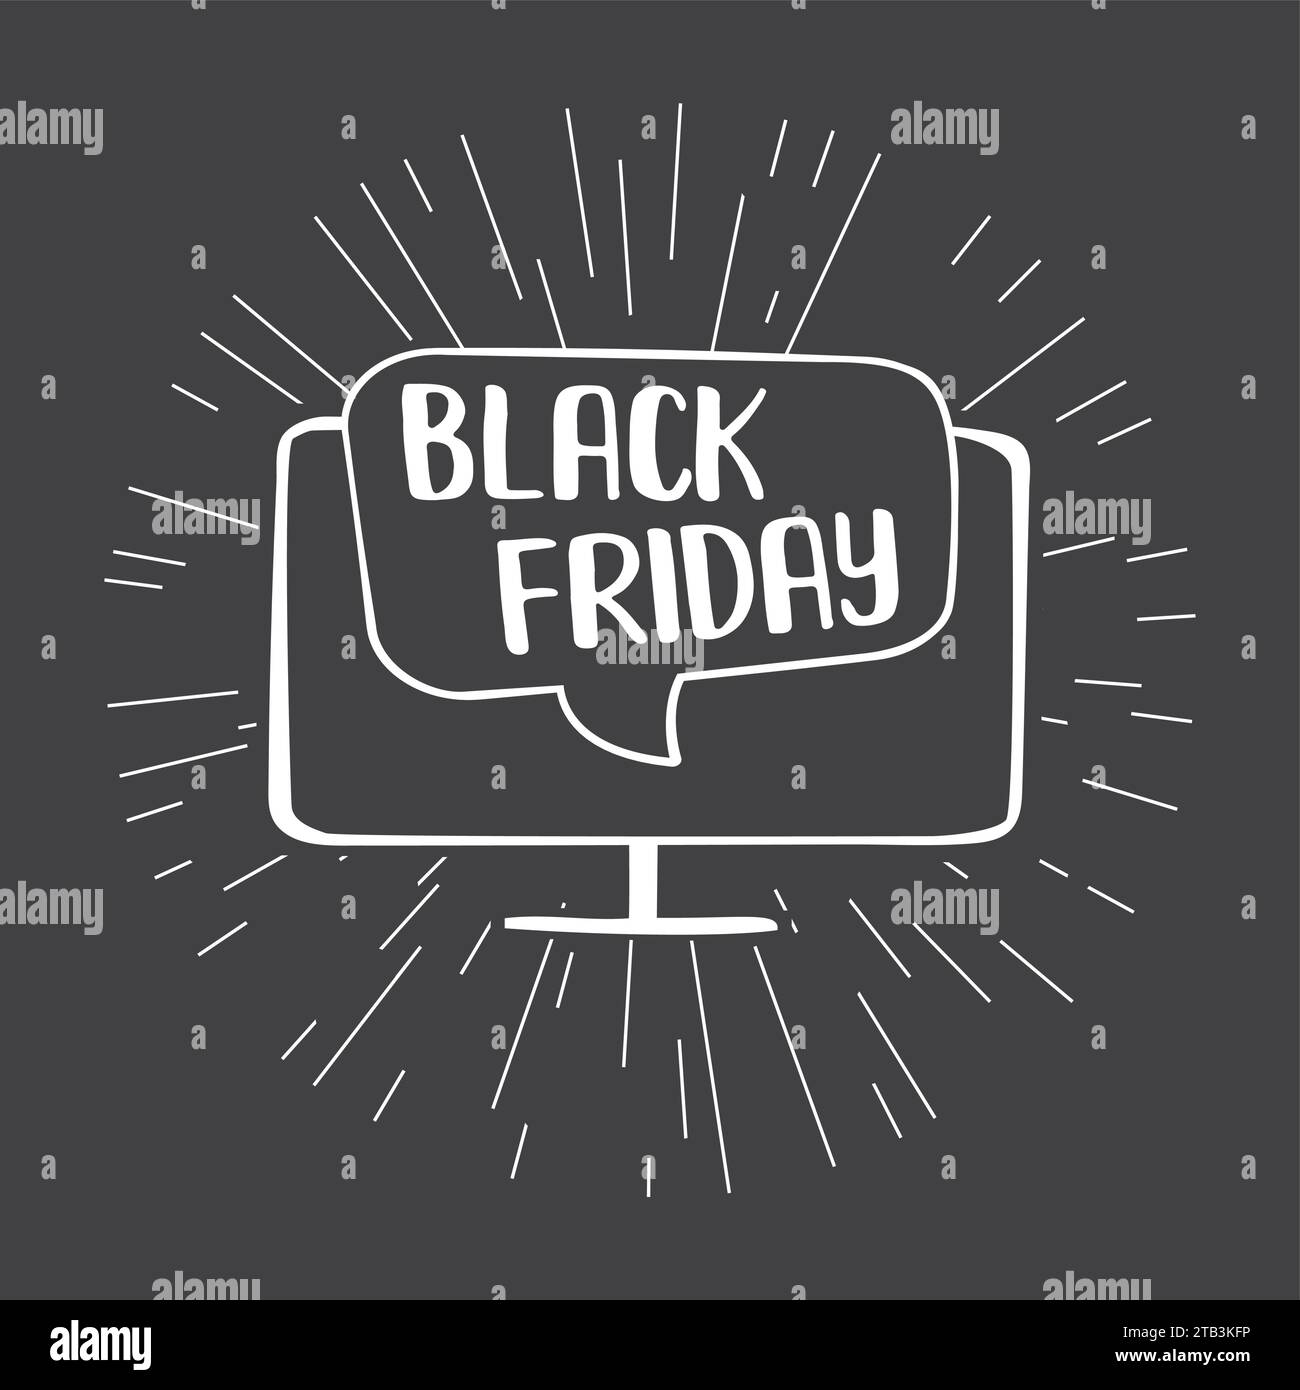 Black friday sale. Speech bubble doodle on tv screen or pc monitor. Target marketing. Design template on black background. Funny doodle vector illustr Stock Vector